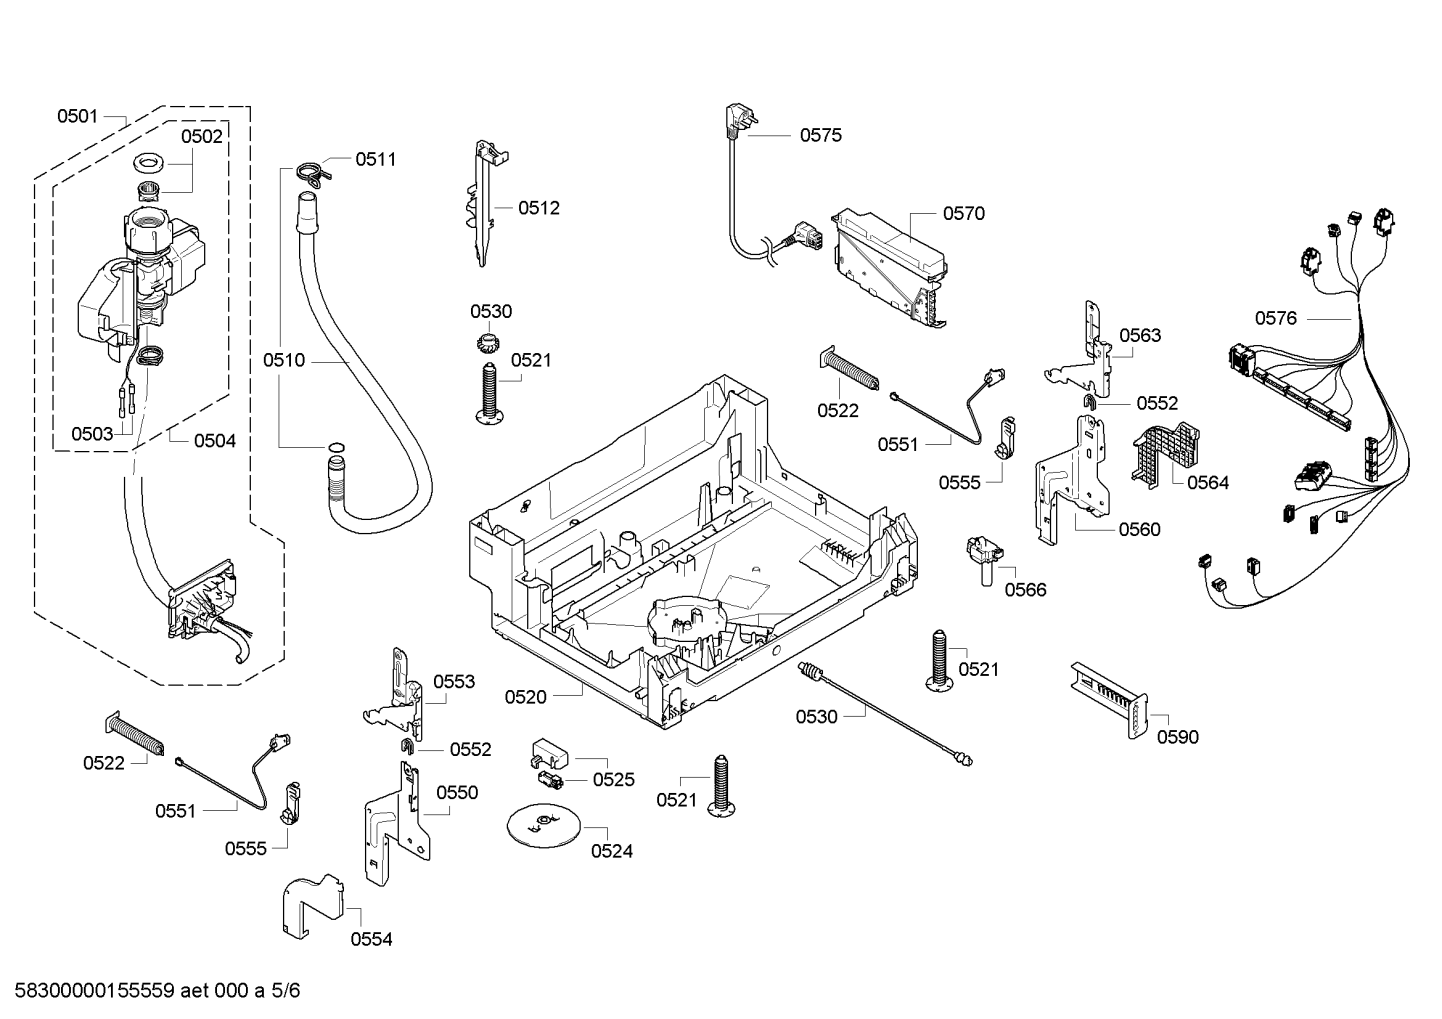 drawing_link_5_device_1599044